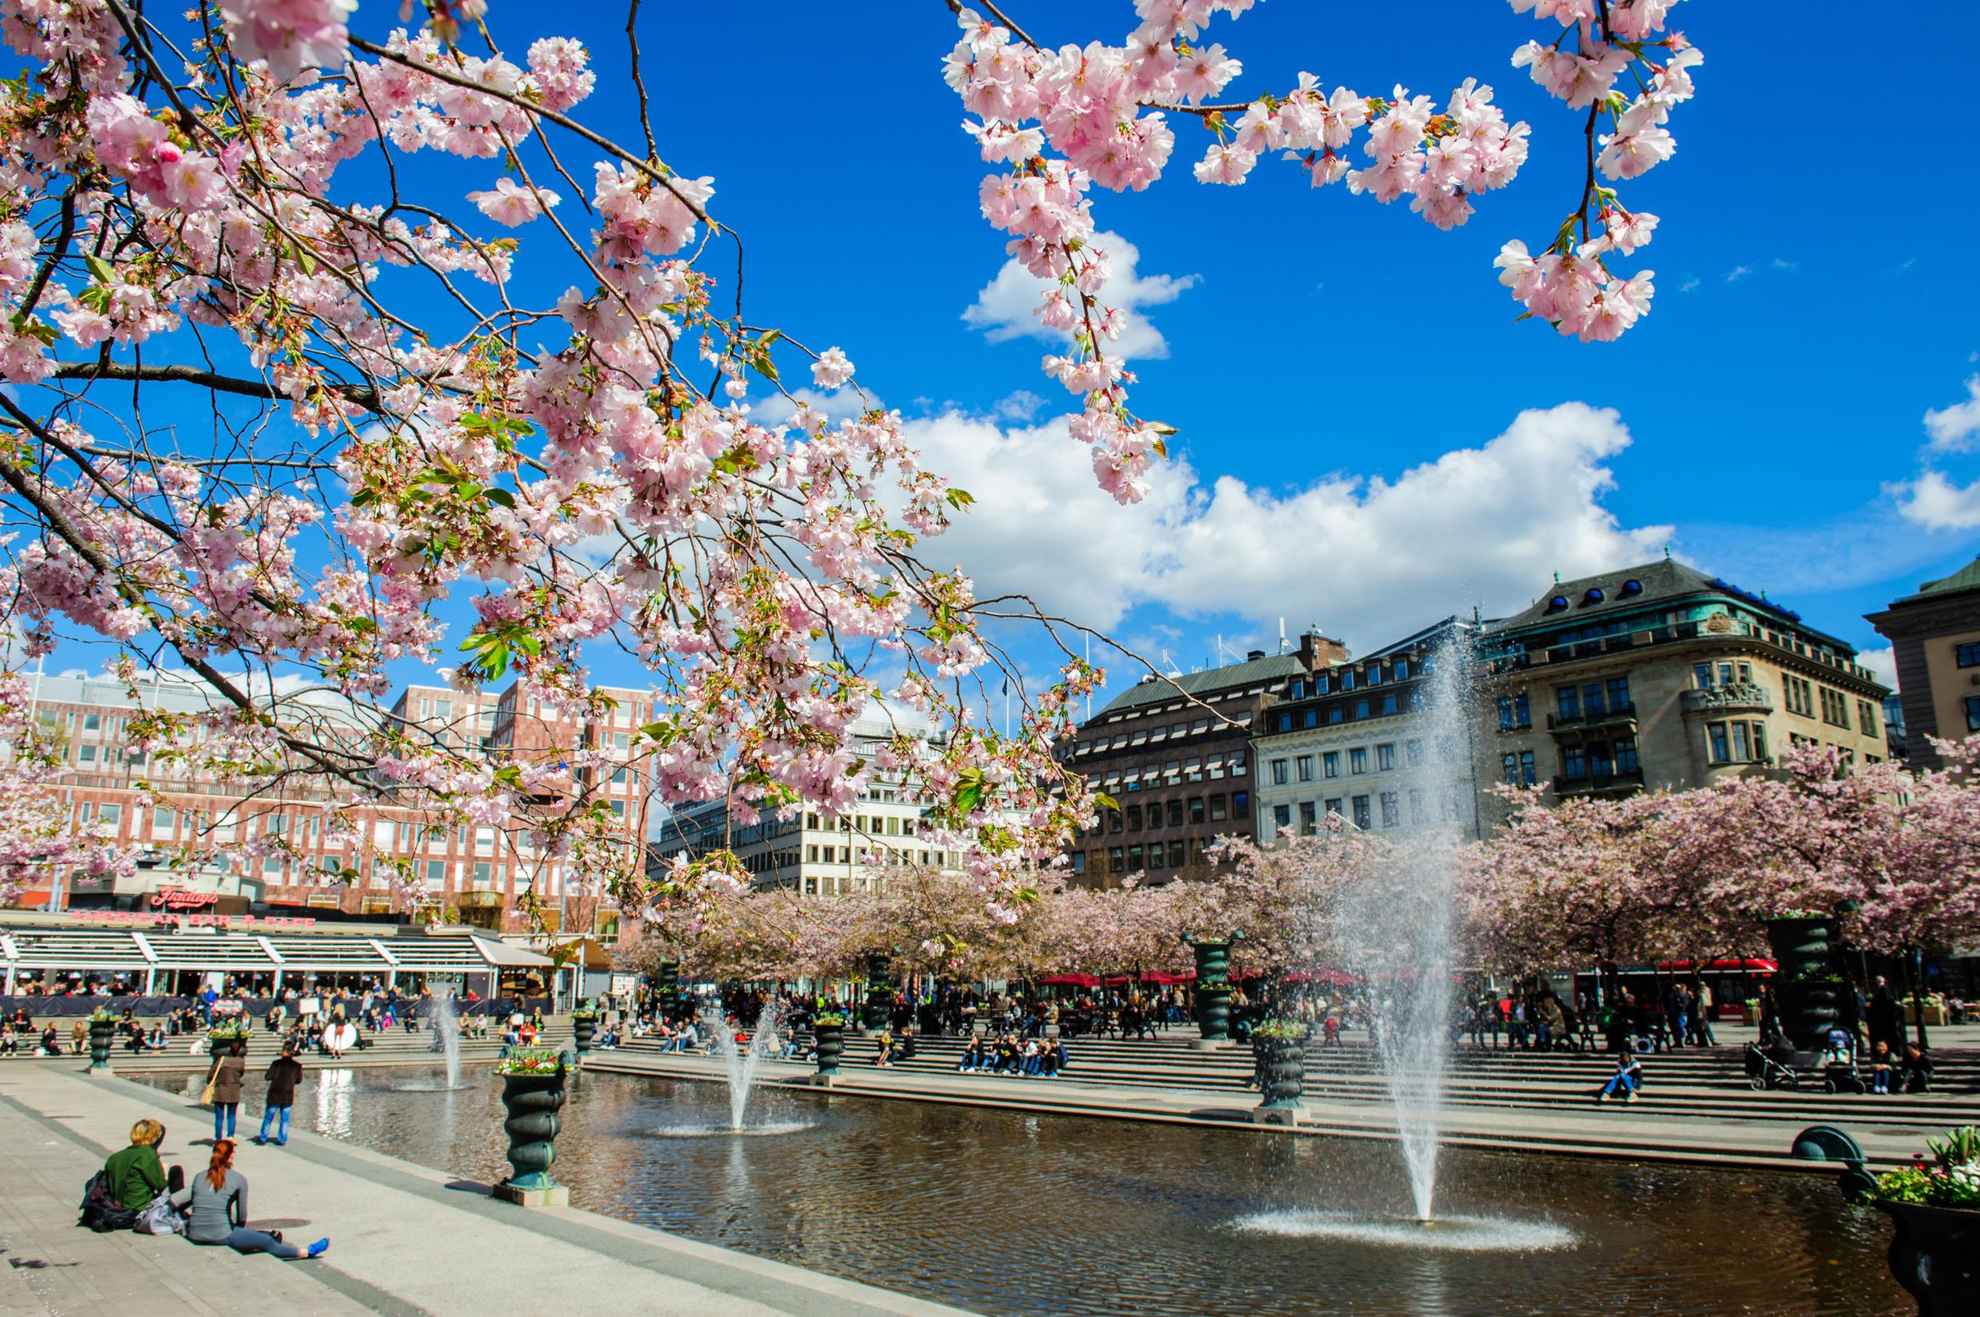 People in the King's Garden in central Stockholm are walking or sitting down under the cherry blossoms surrounding a large water fountain.